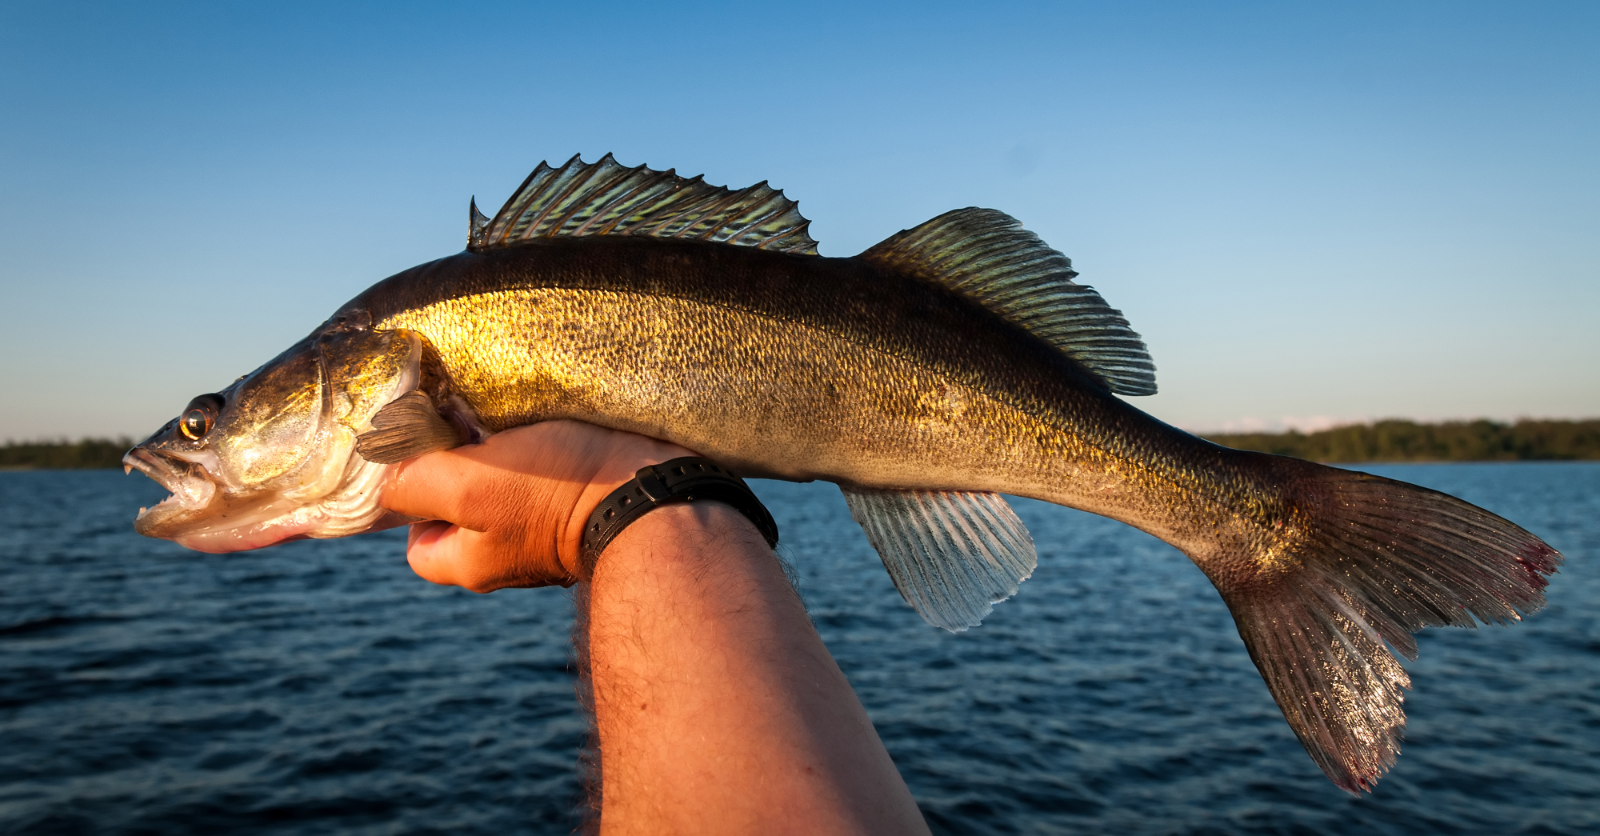 https://www.yellowbirdproducts.com/wp-content/uploads/2021/08/What-To-Know-About-Fishing-Walleye-With-Planer-Boards.png